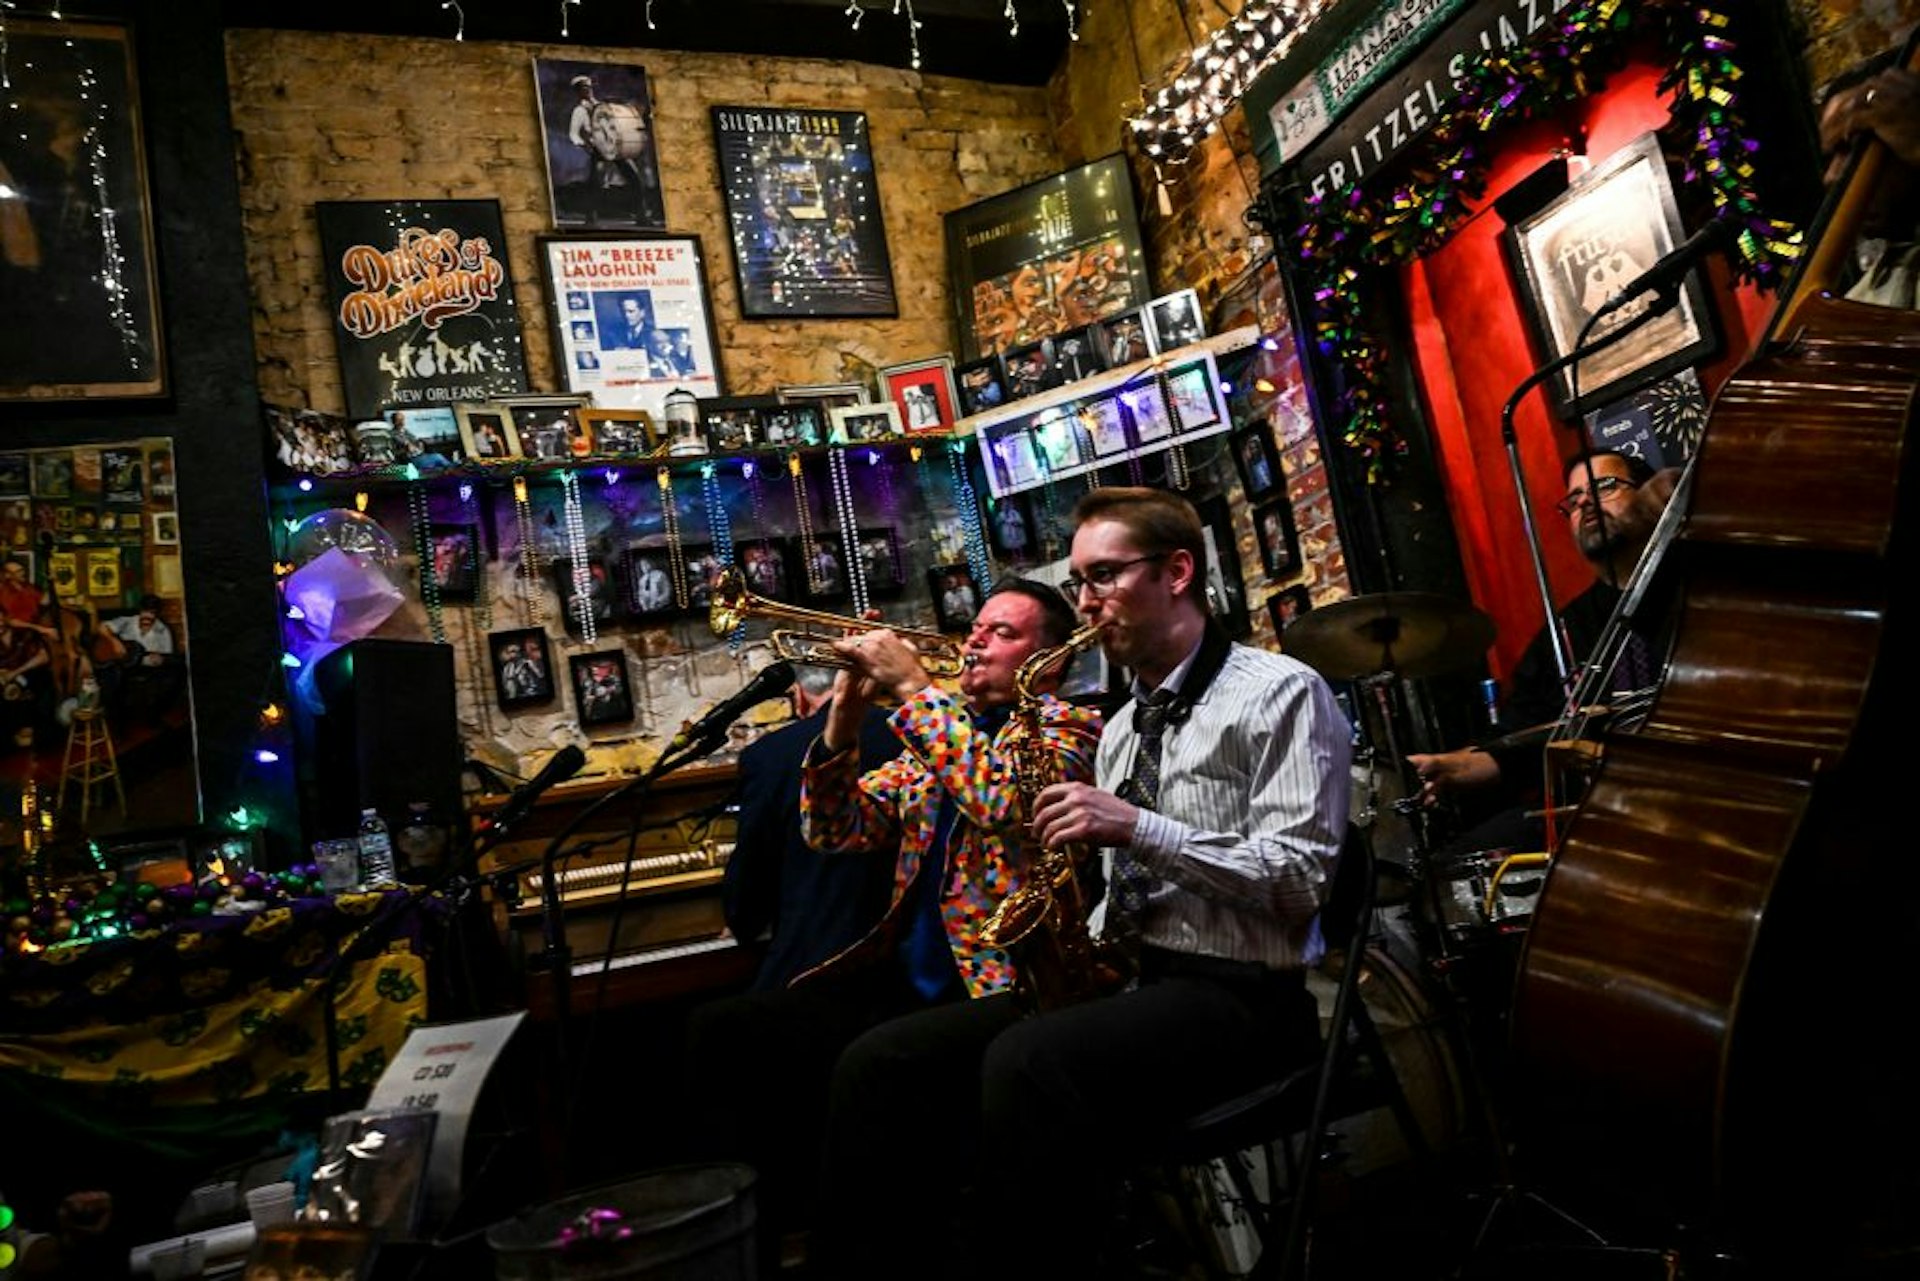 A group of musicians play at the Fritzel Jazz Club in the French Quarter during a Mardi Gras celebration in New Orleans, Louisiana, on February 19, 2023